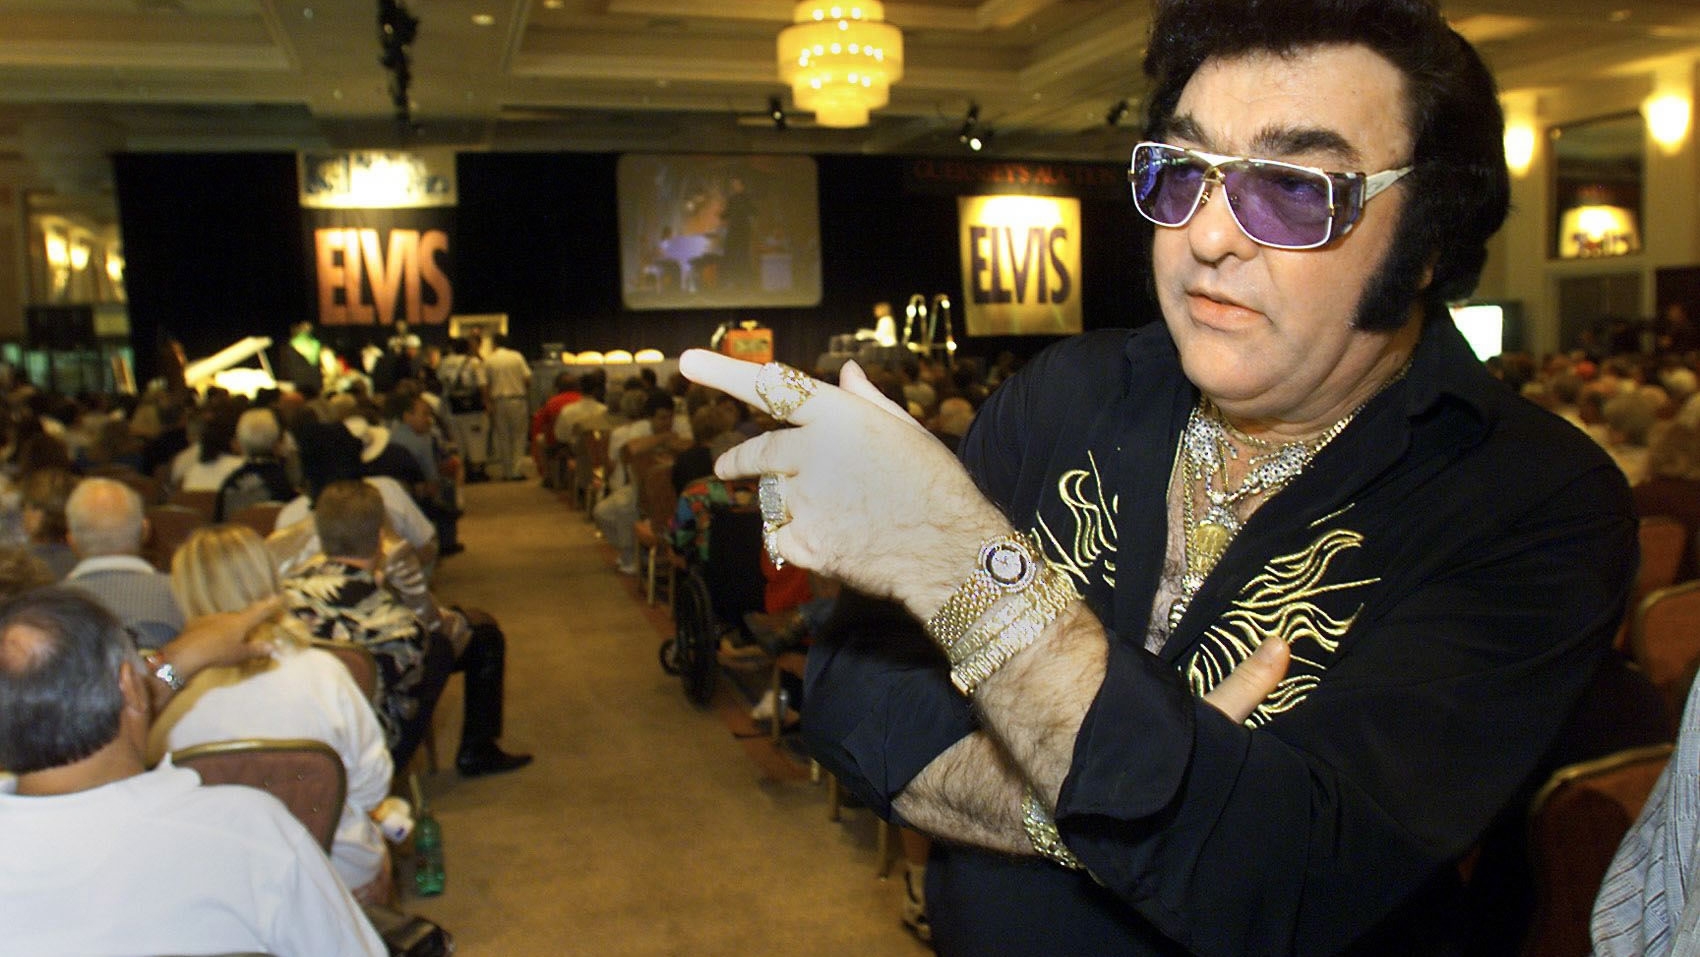 Australian Elvis festival still 'fantastic' after 30 years | Life-style  News - The Indian Express